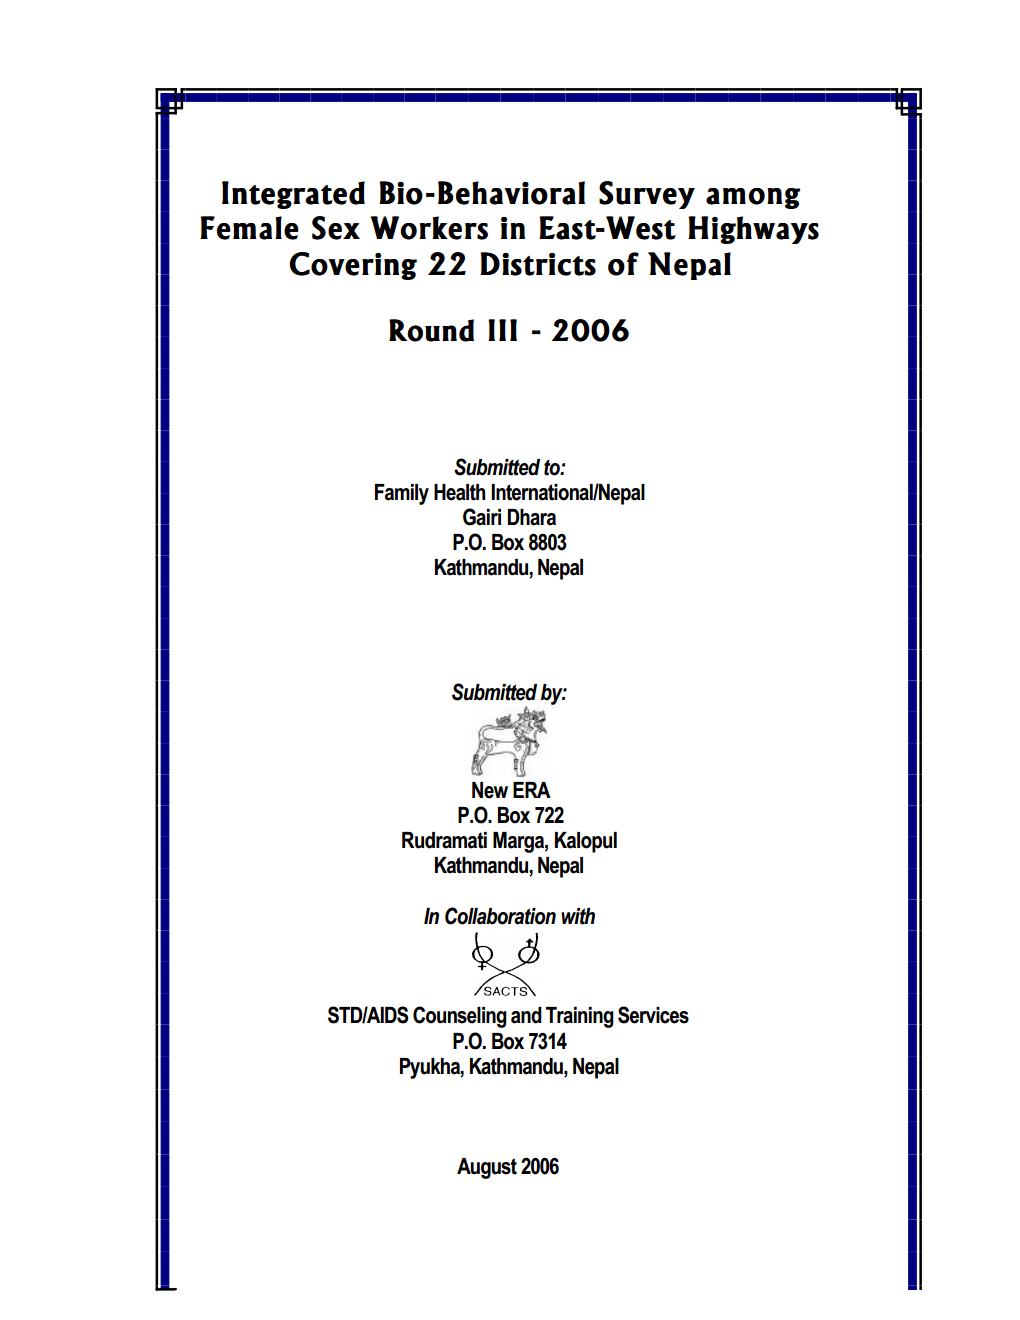 Integrated Bio-Behavioral Survey among Female Sex Workers in East-West Highways Covering 22 Districts of Nepal